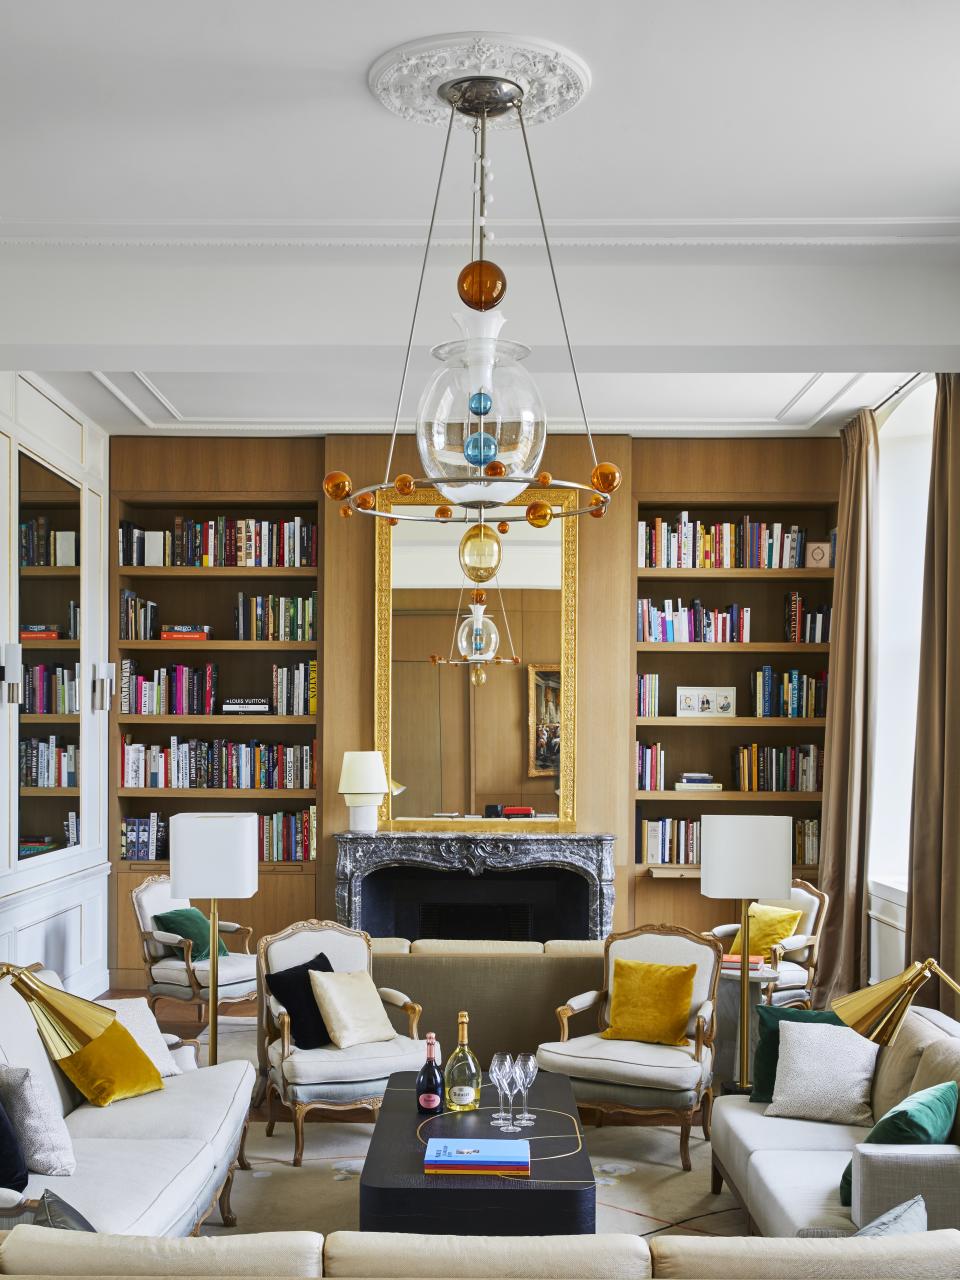 A library at the Ruinart headquarters.